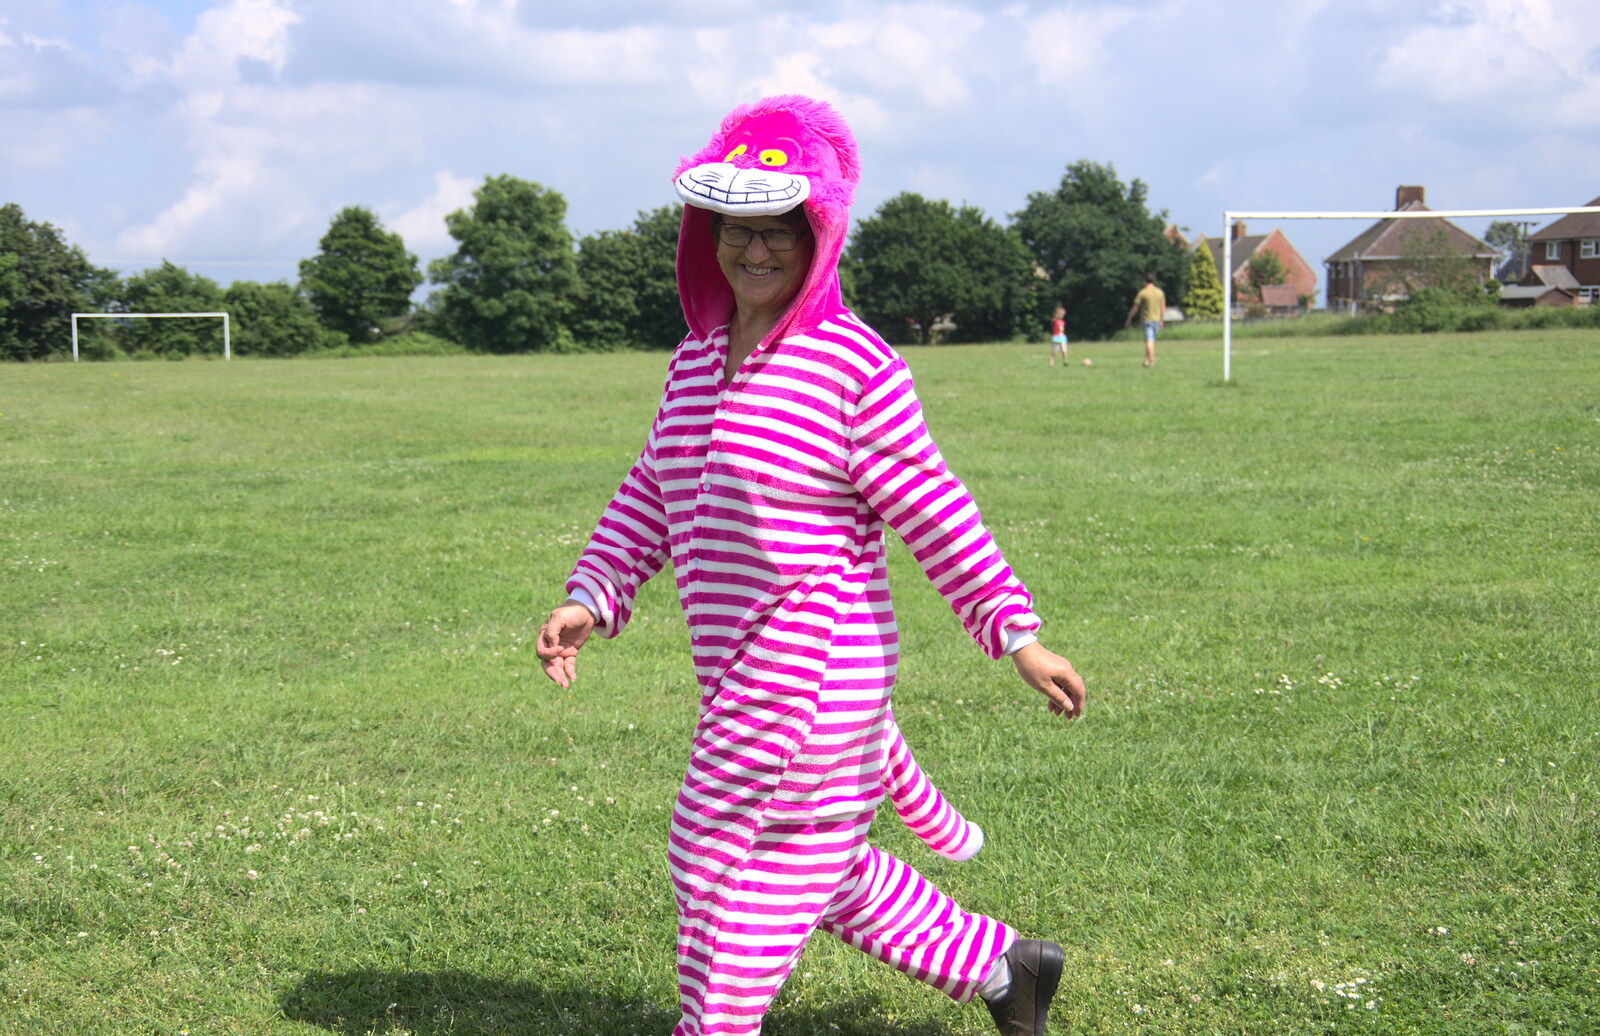 The 'Cheshire Cat' walks past from The Not-Opening of the Palgrave Playground, Palgrave, Suffolk - 3rd June 2018